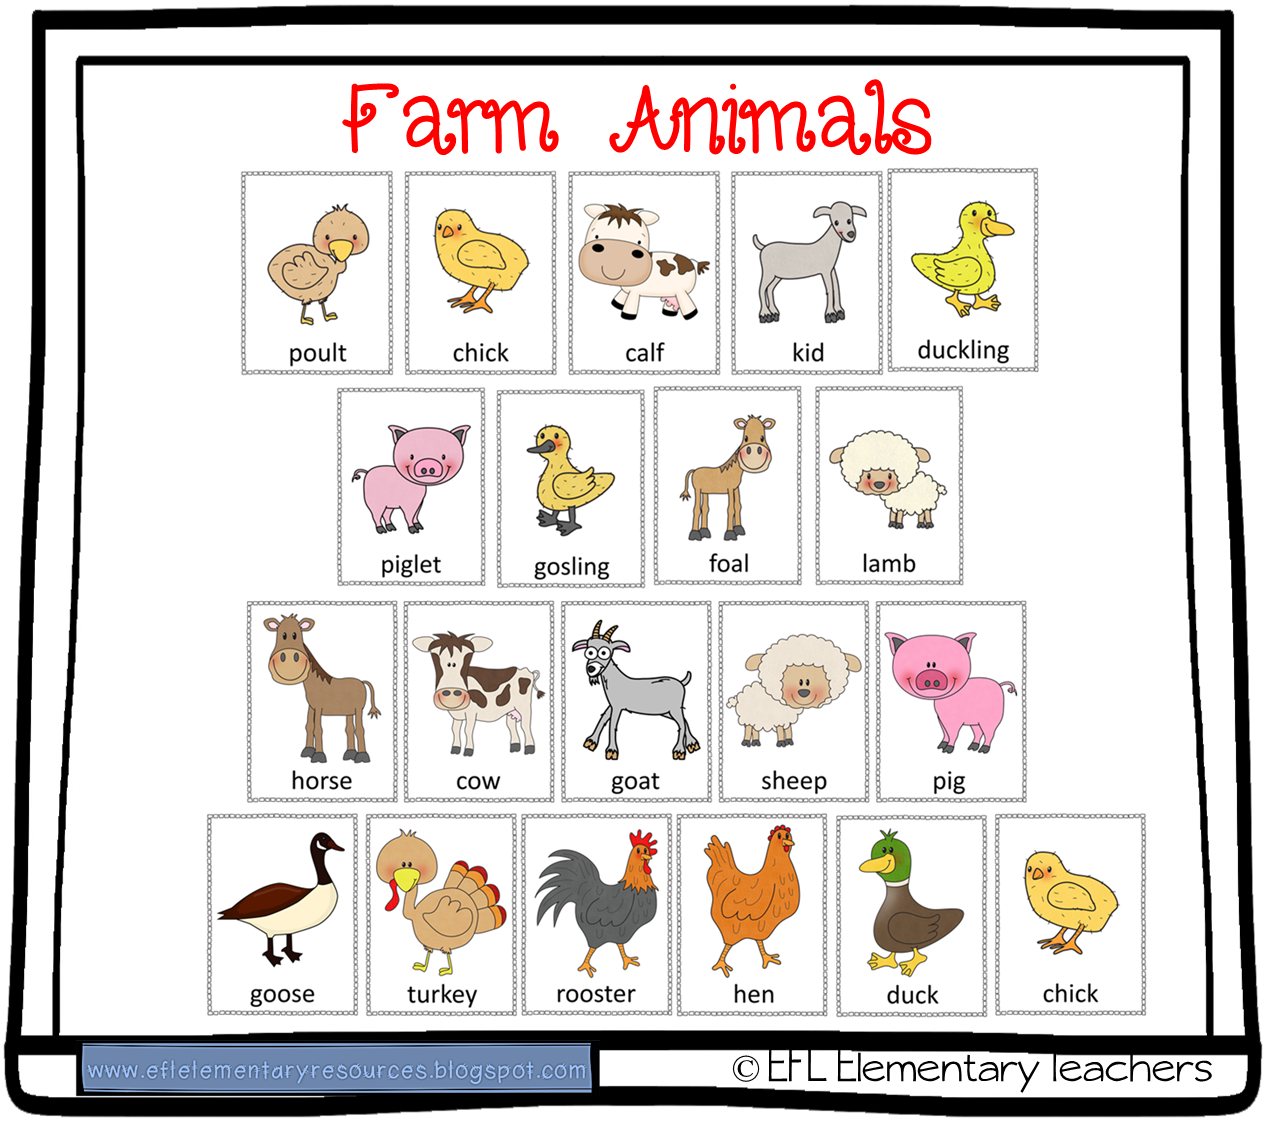 Fill in natural animal. Farm animals for Kids. Domestic and Farm animals карточки. Farm animals Vocabulary for Kids. Farm animals Worksheets.